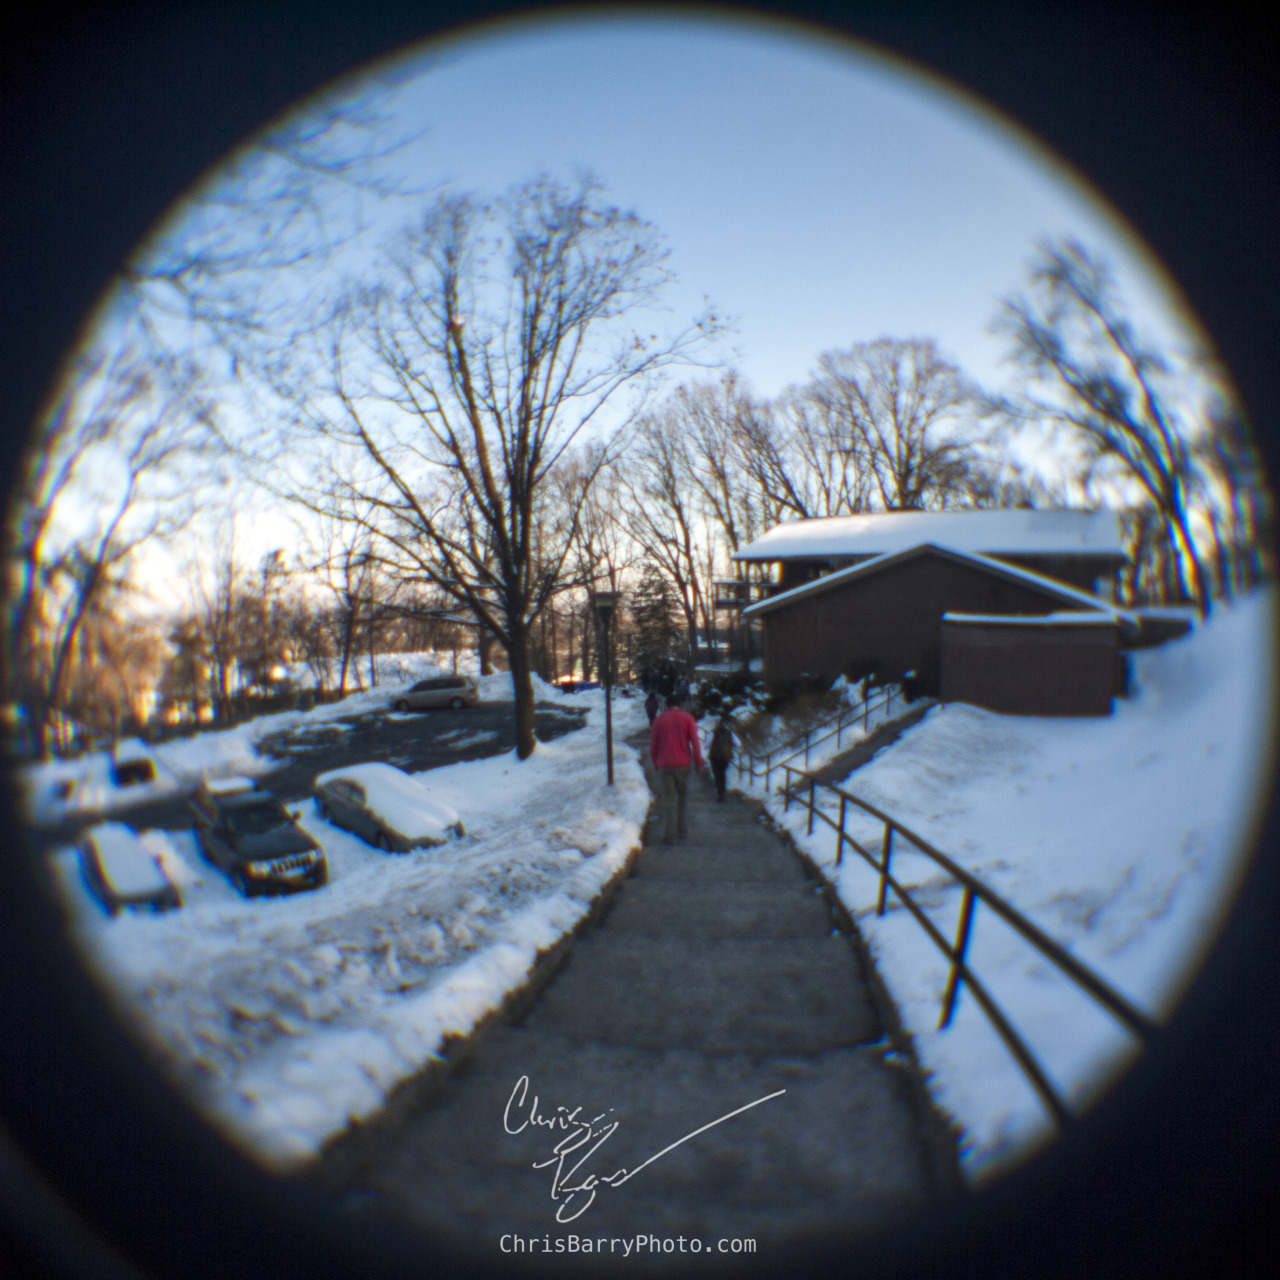 Since I've been using normal lenses all week, I figured I'd bring the fisheye today